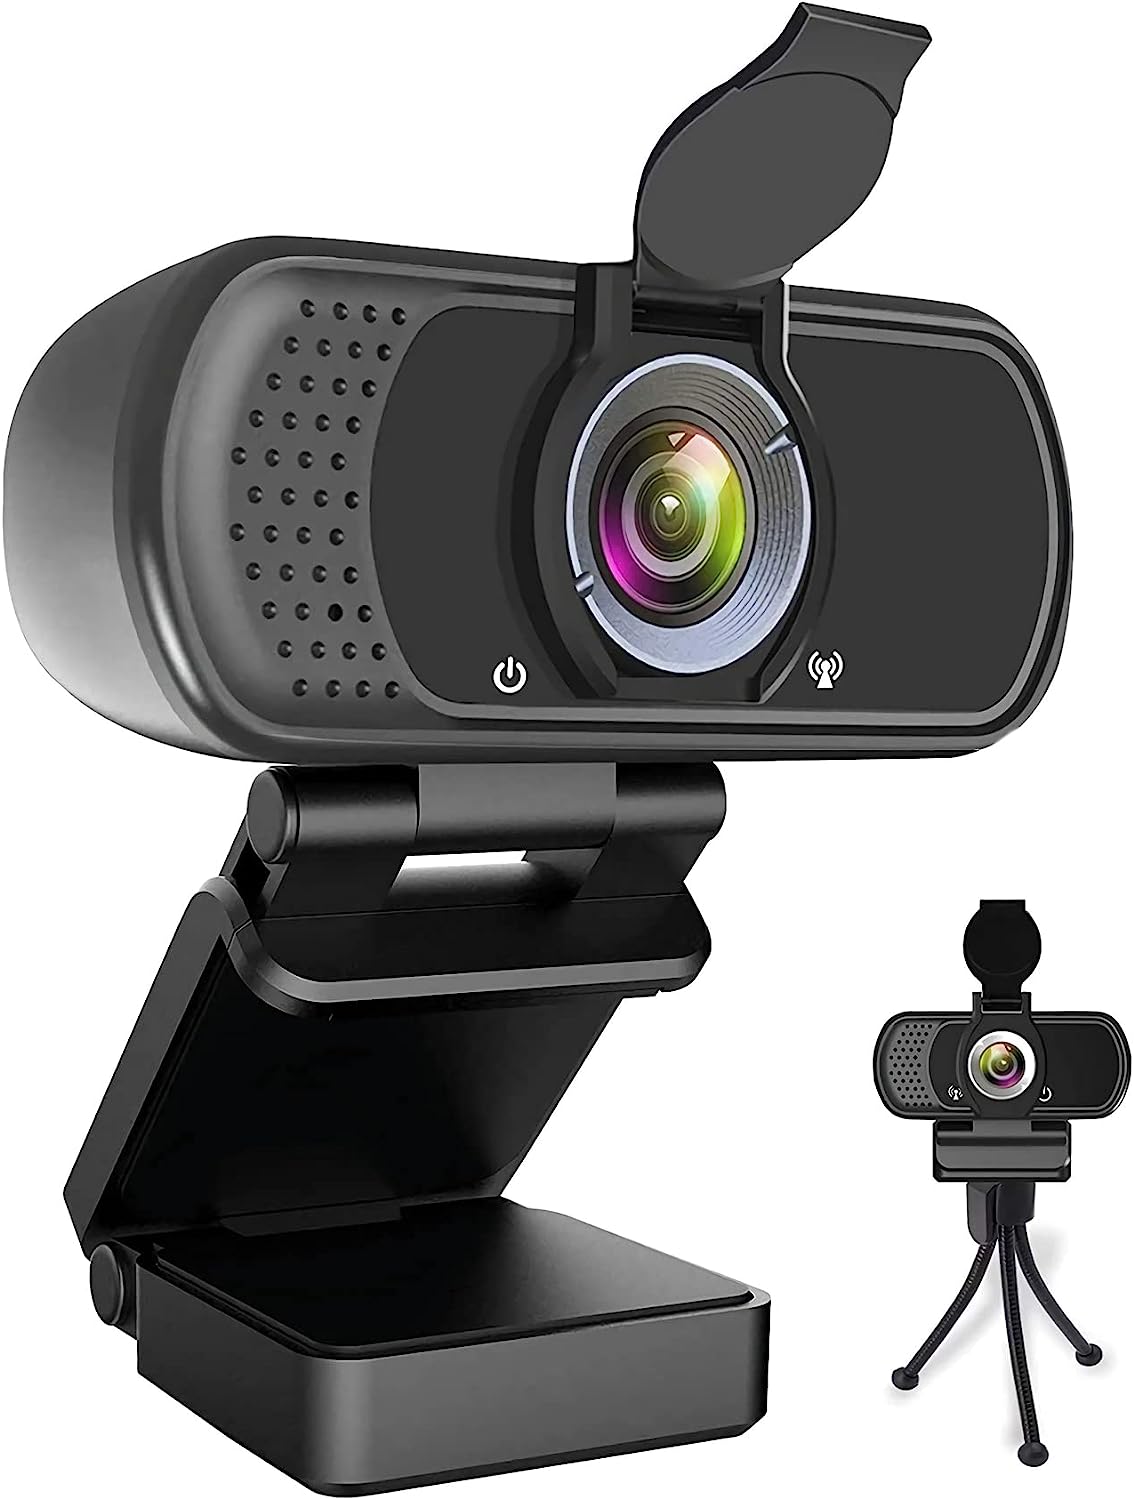 HZQDLN Webcam HD 1080P,Webcam with Microphone, USB [...]